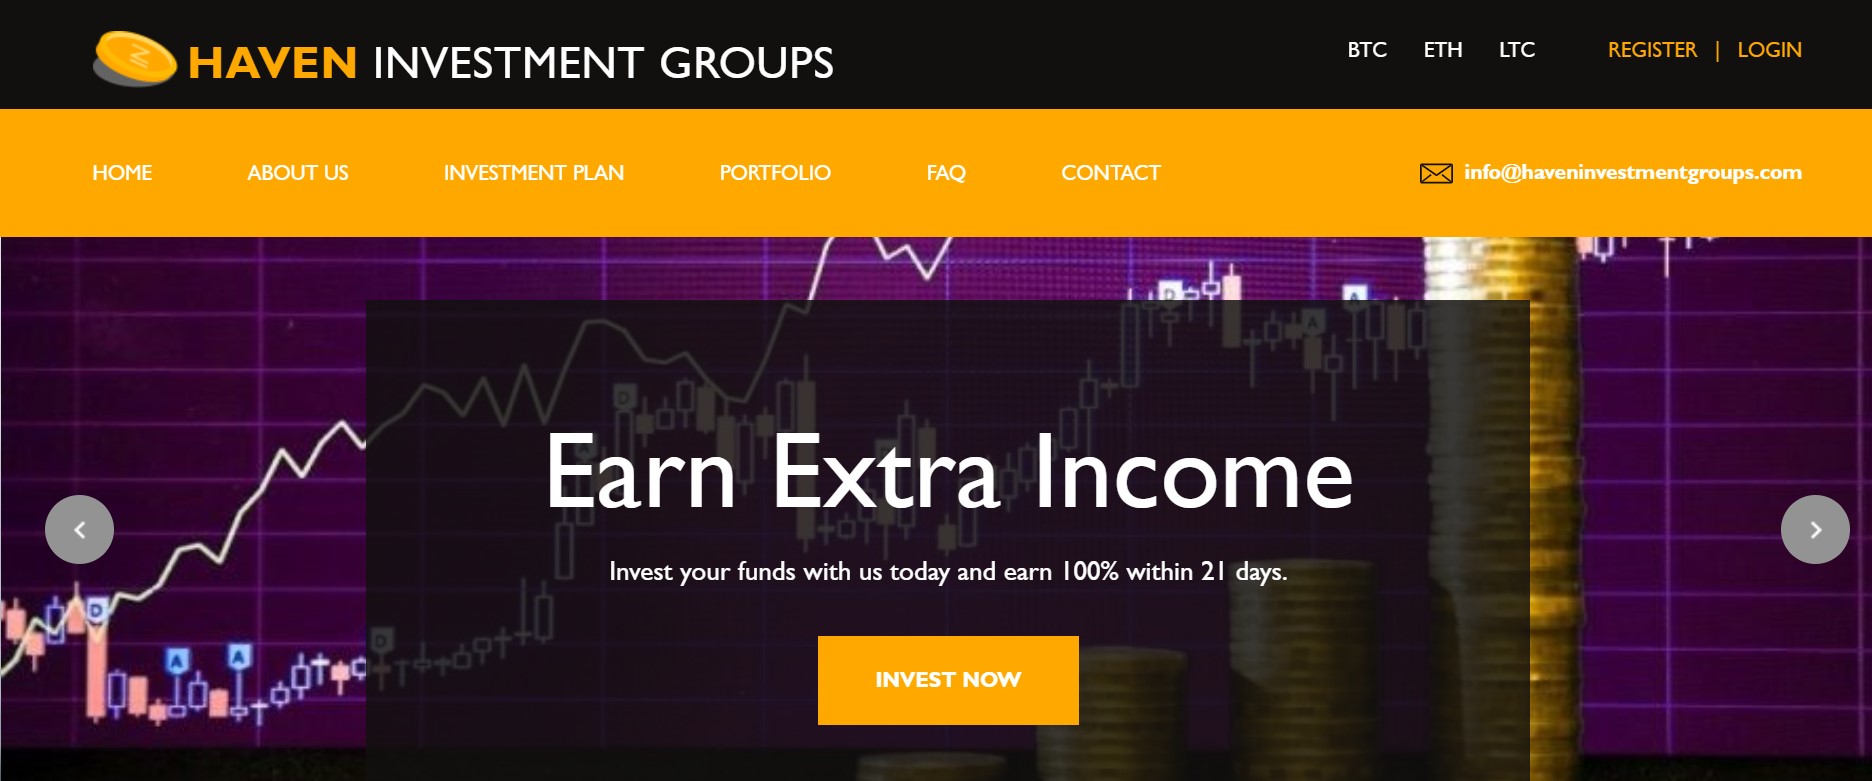 Haven Investment Groups website